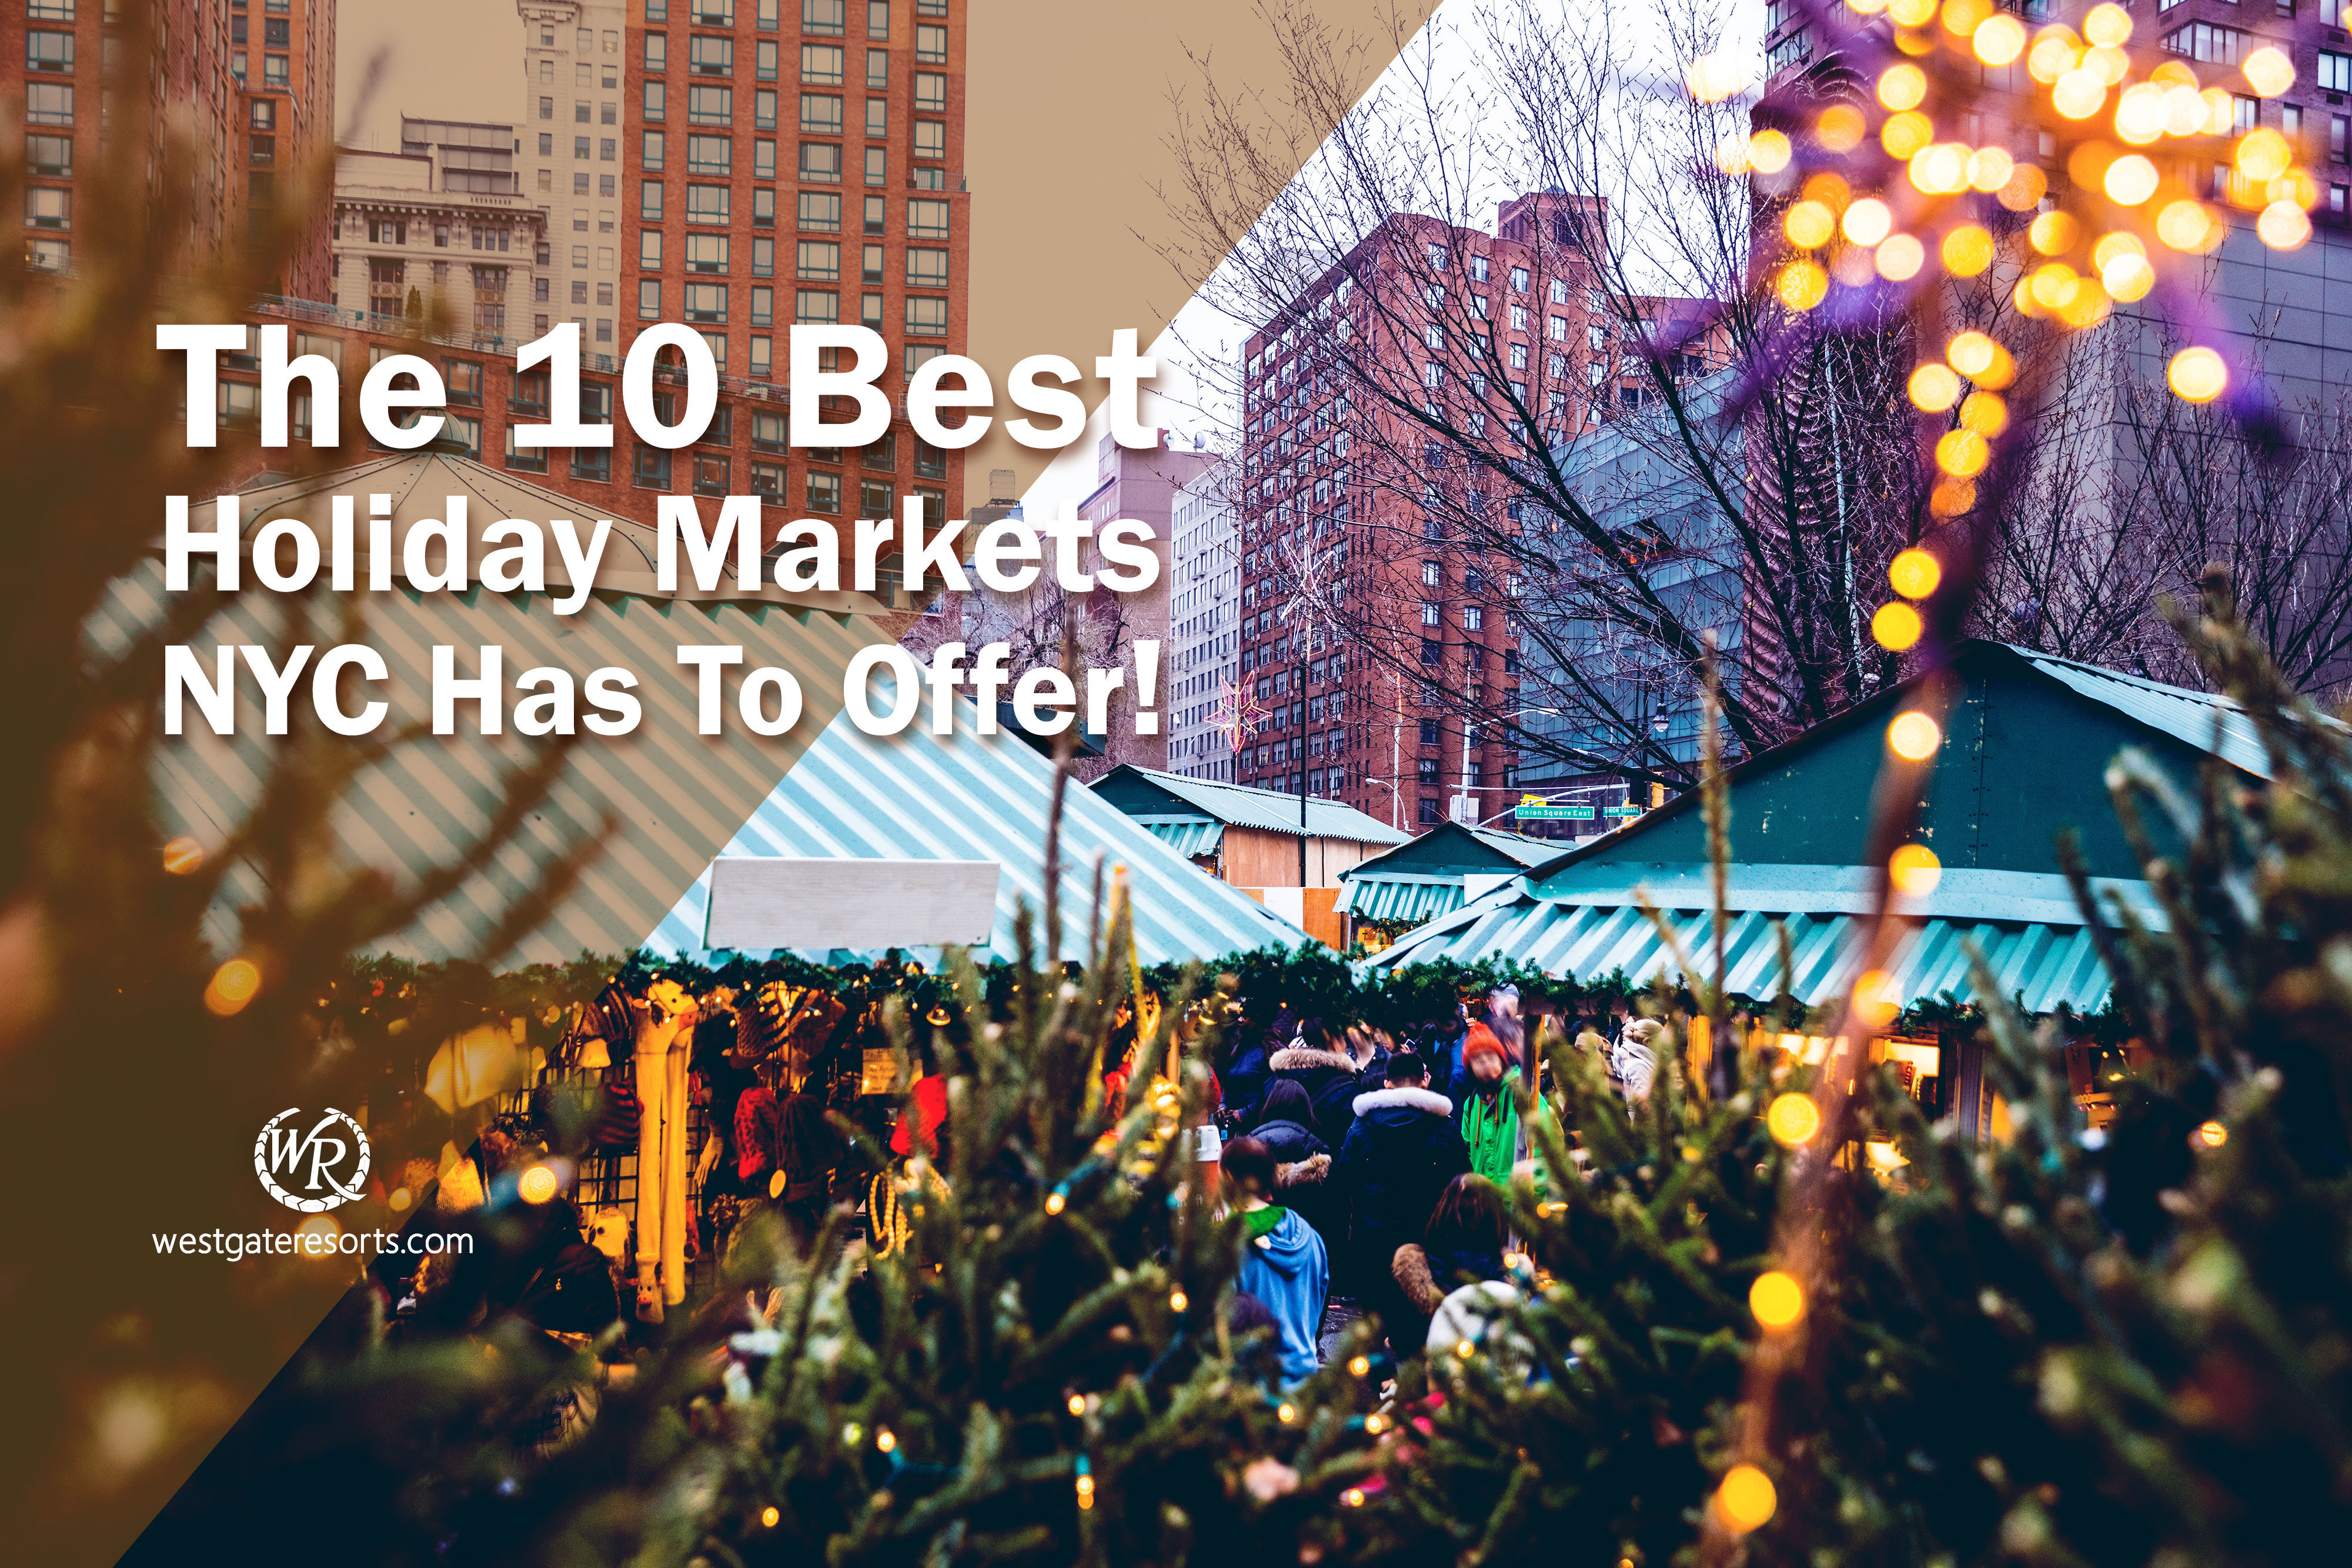 The 10 Best Holiday Markets NYC Has To Offer | New York City Christmas Markets